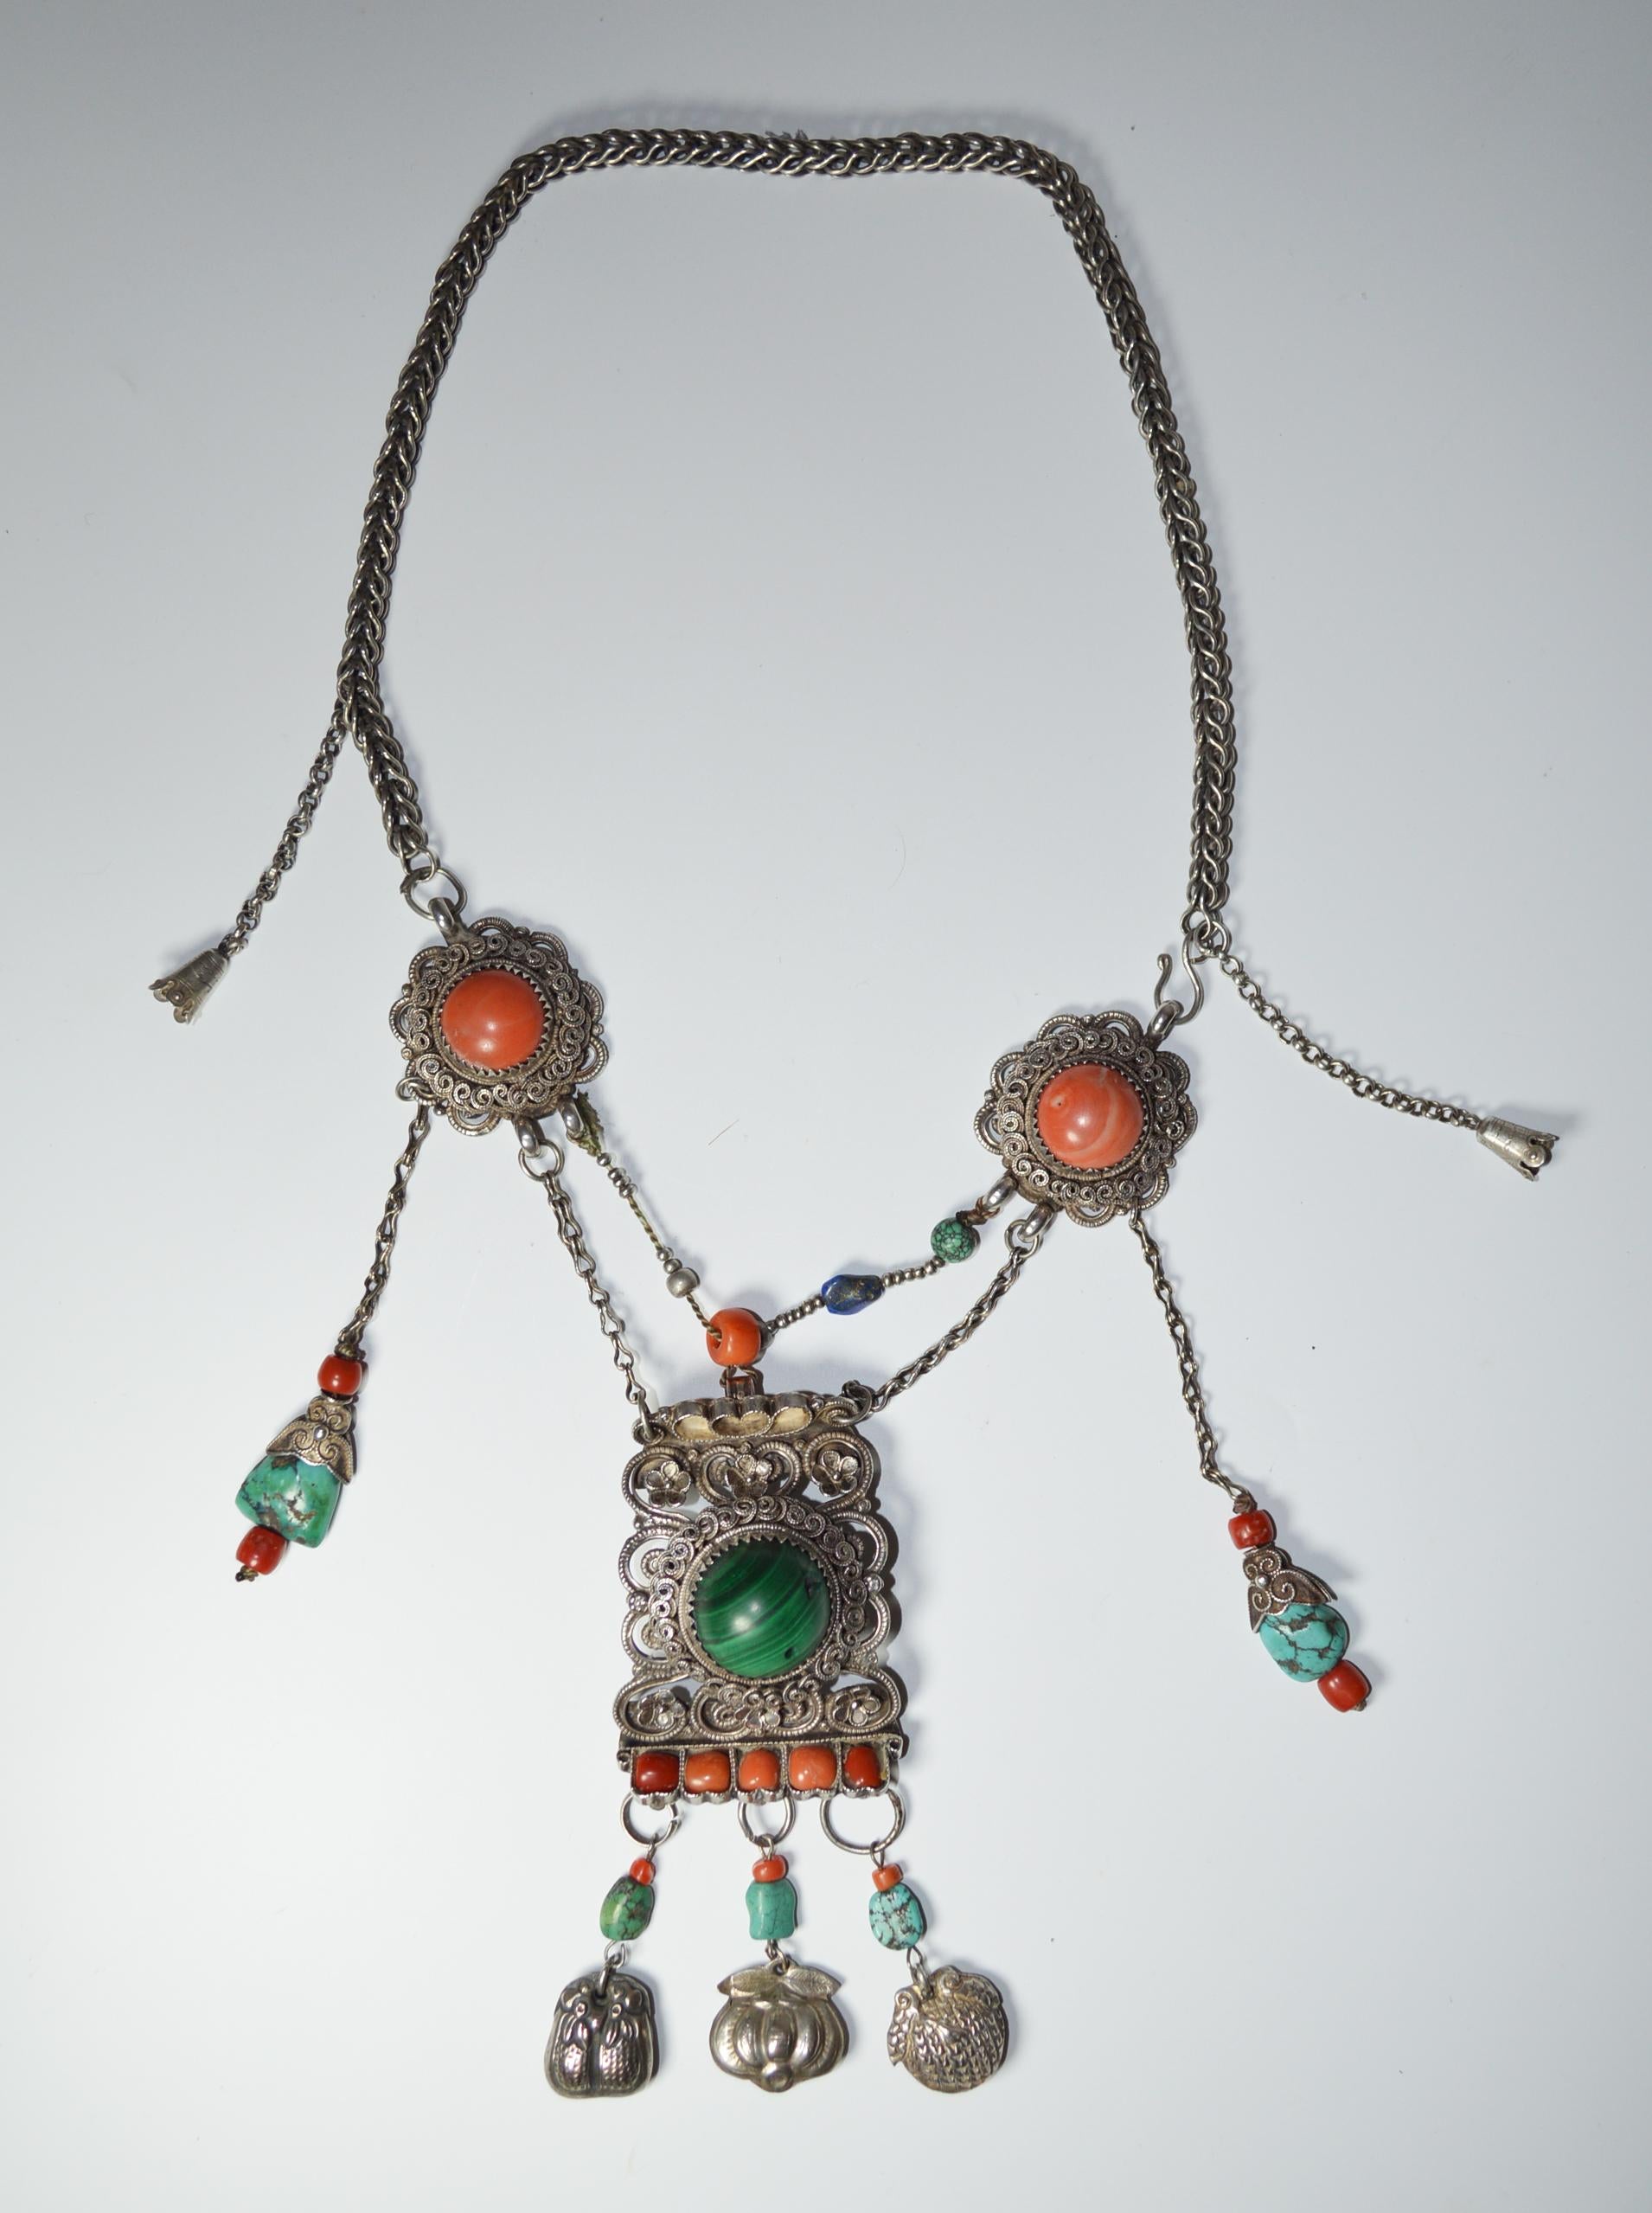 A rare and important Chinese antique silver filigree necklace with real antique salmon coral cabochon beads with turquoise and malachite
Chinese hall/makers mark on back
Qing period 19th century
Nice wearable antique piece in fine condition
Size